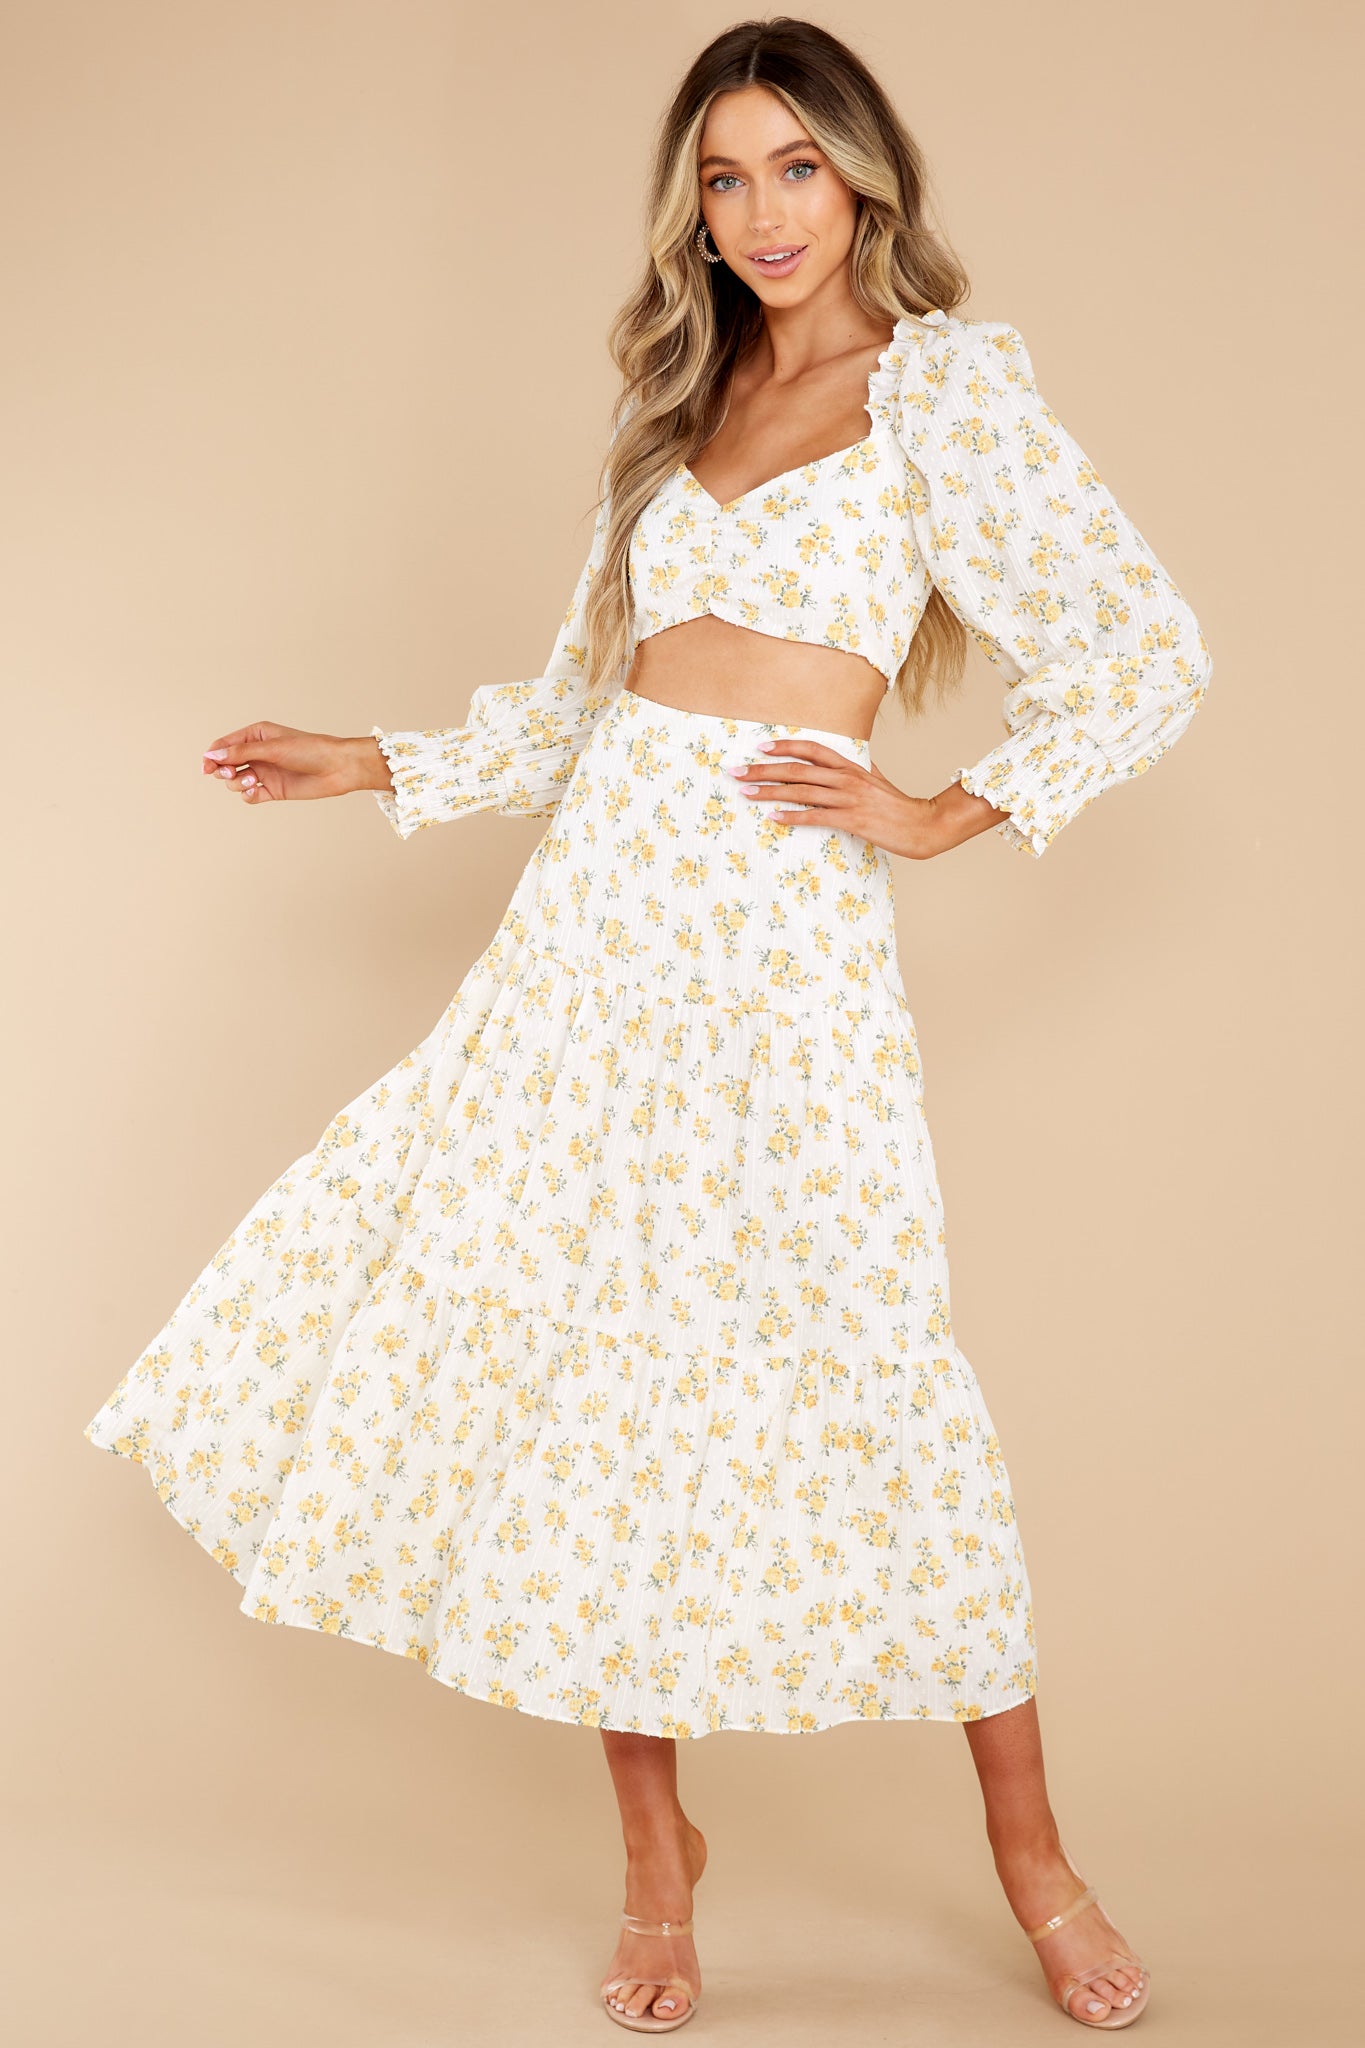 1 In Your Arms White And Yellow Floral Print Top at reddress.com